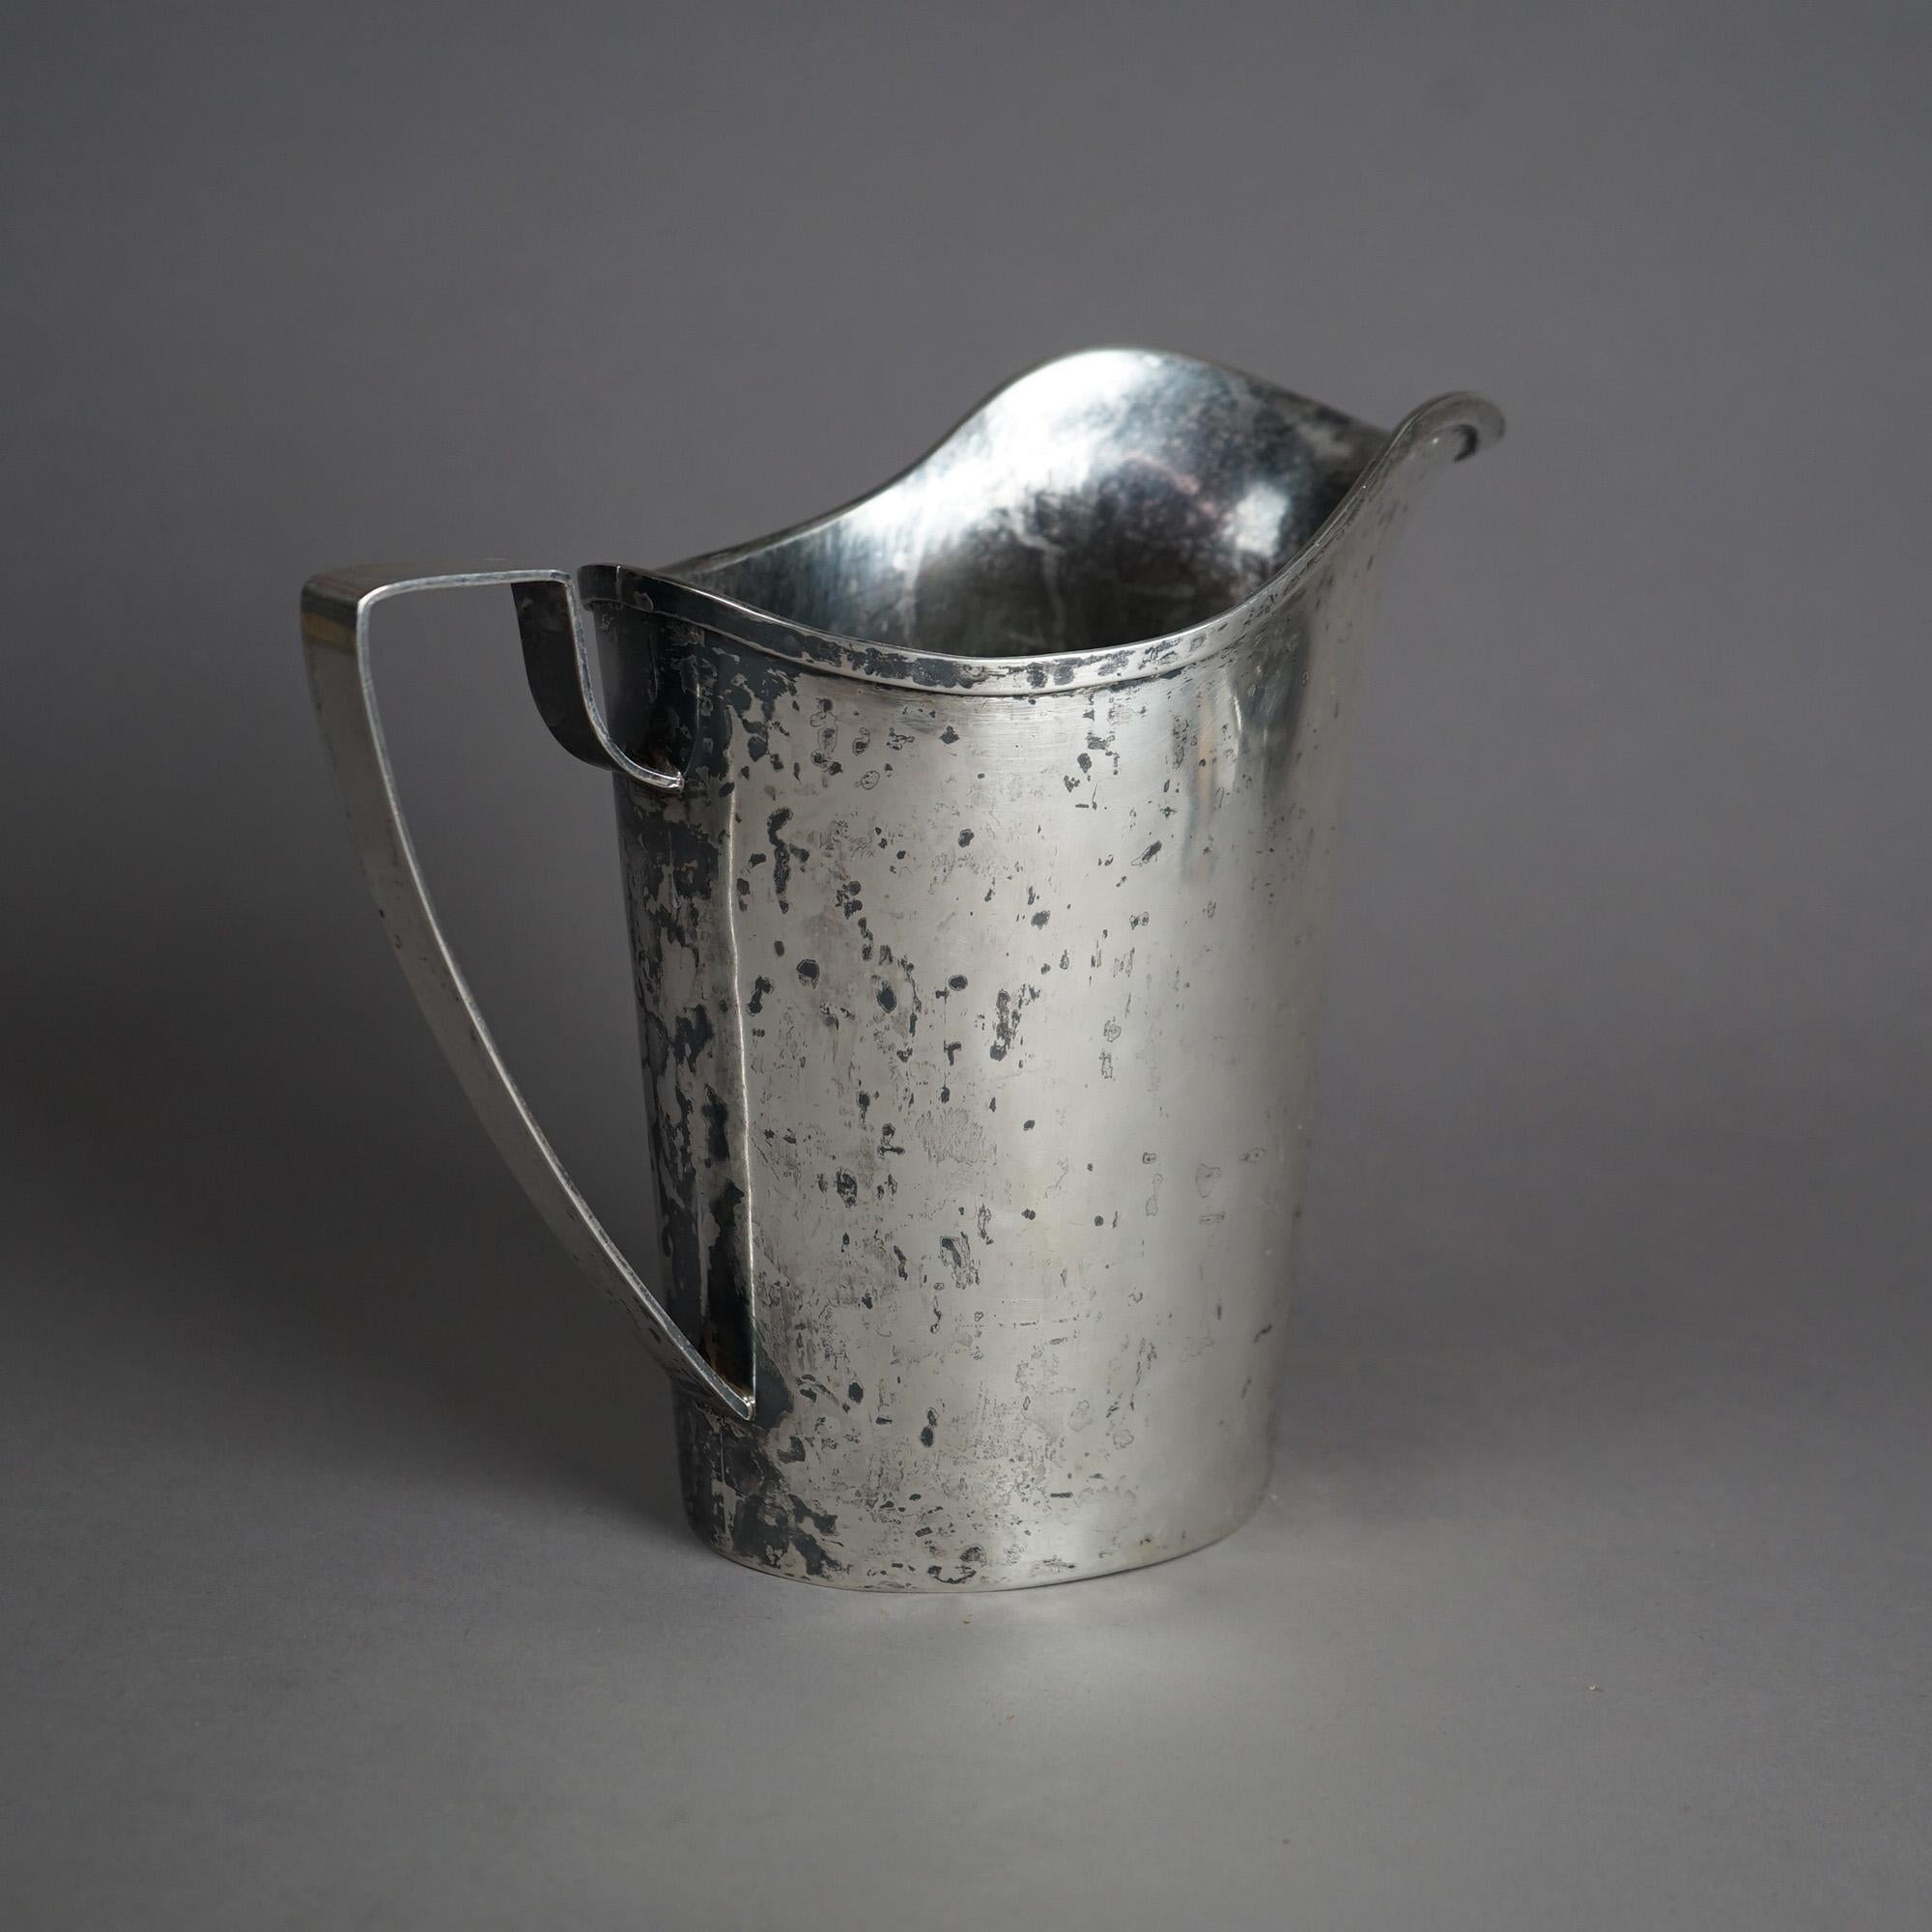 Antique Arts & Crafts Sterling Silver Hand Wrought Pitcher, Monogram AS, Possible Arthur Stone, 32.66 OTZ; marked Almagam

Measures- 9.25''H x 5.25''W x 10.5''D